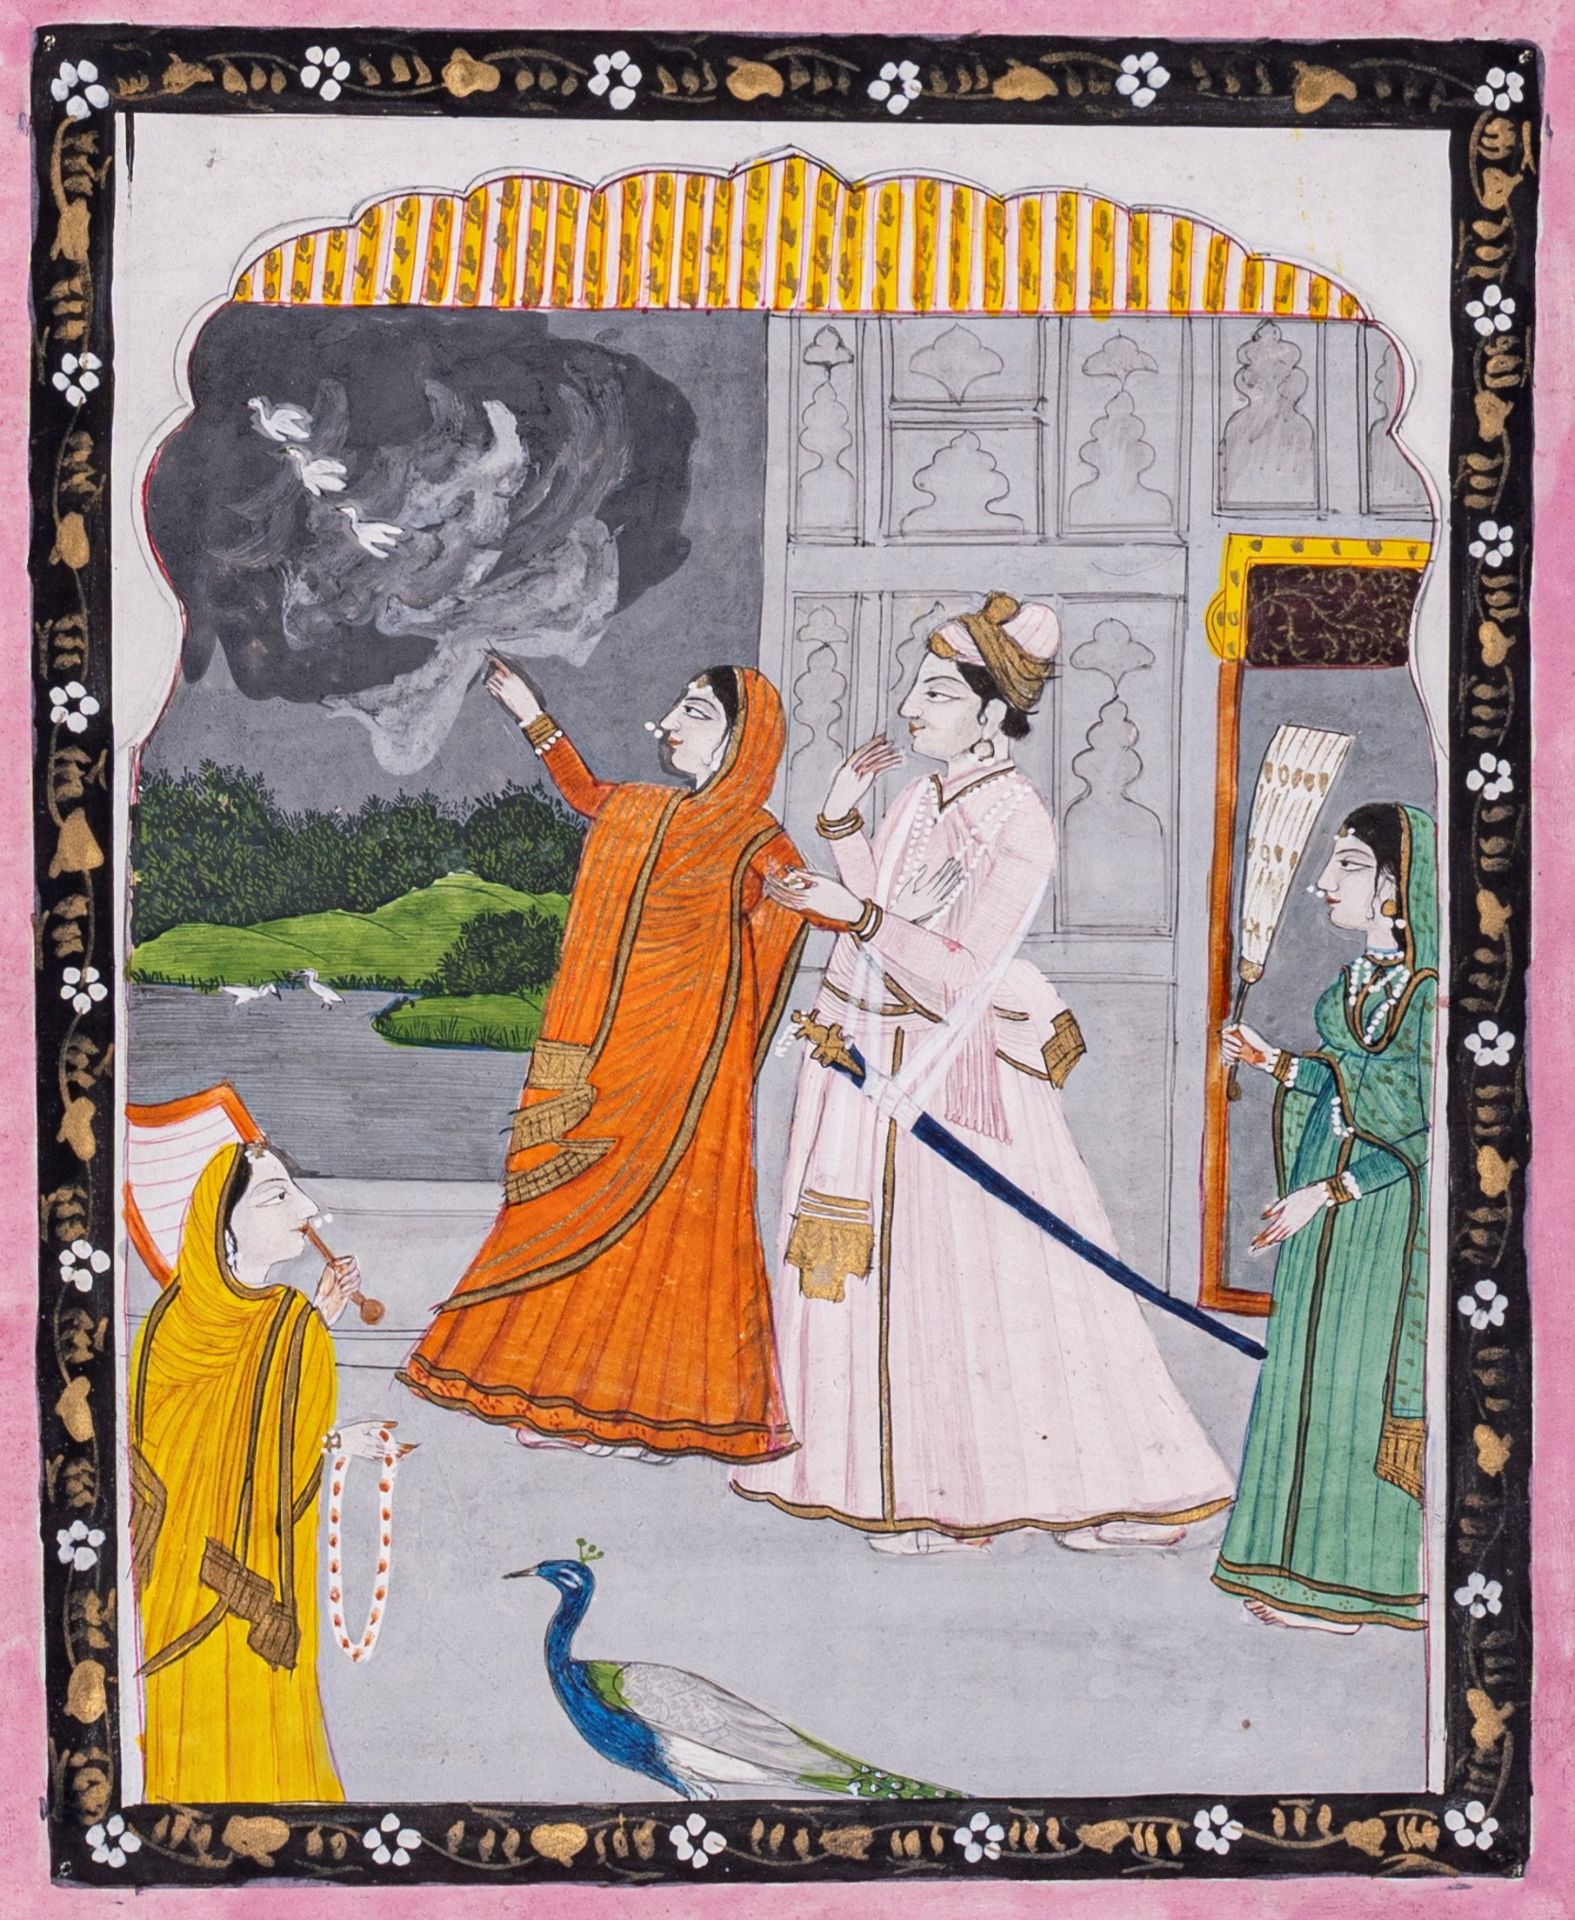 AN INDIAN MINIATURE PAINTING OF A NOBLE COUPLE, c. 1900s